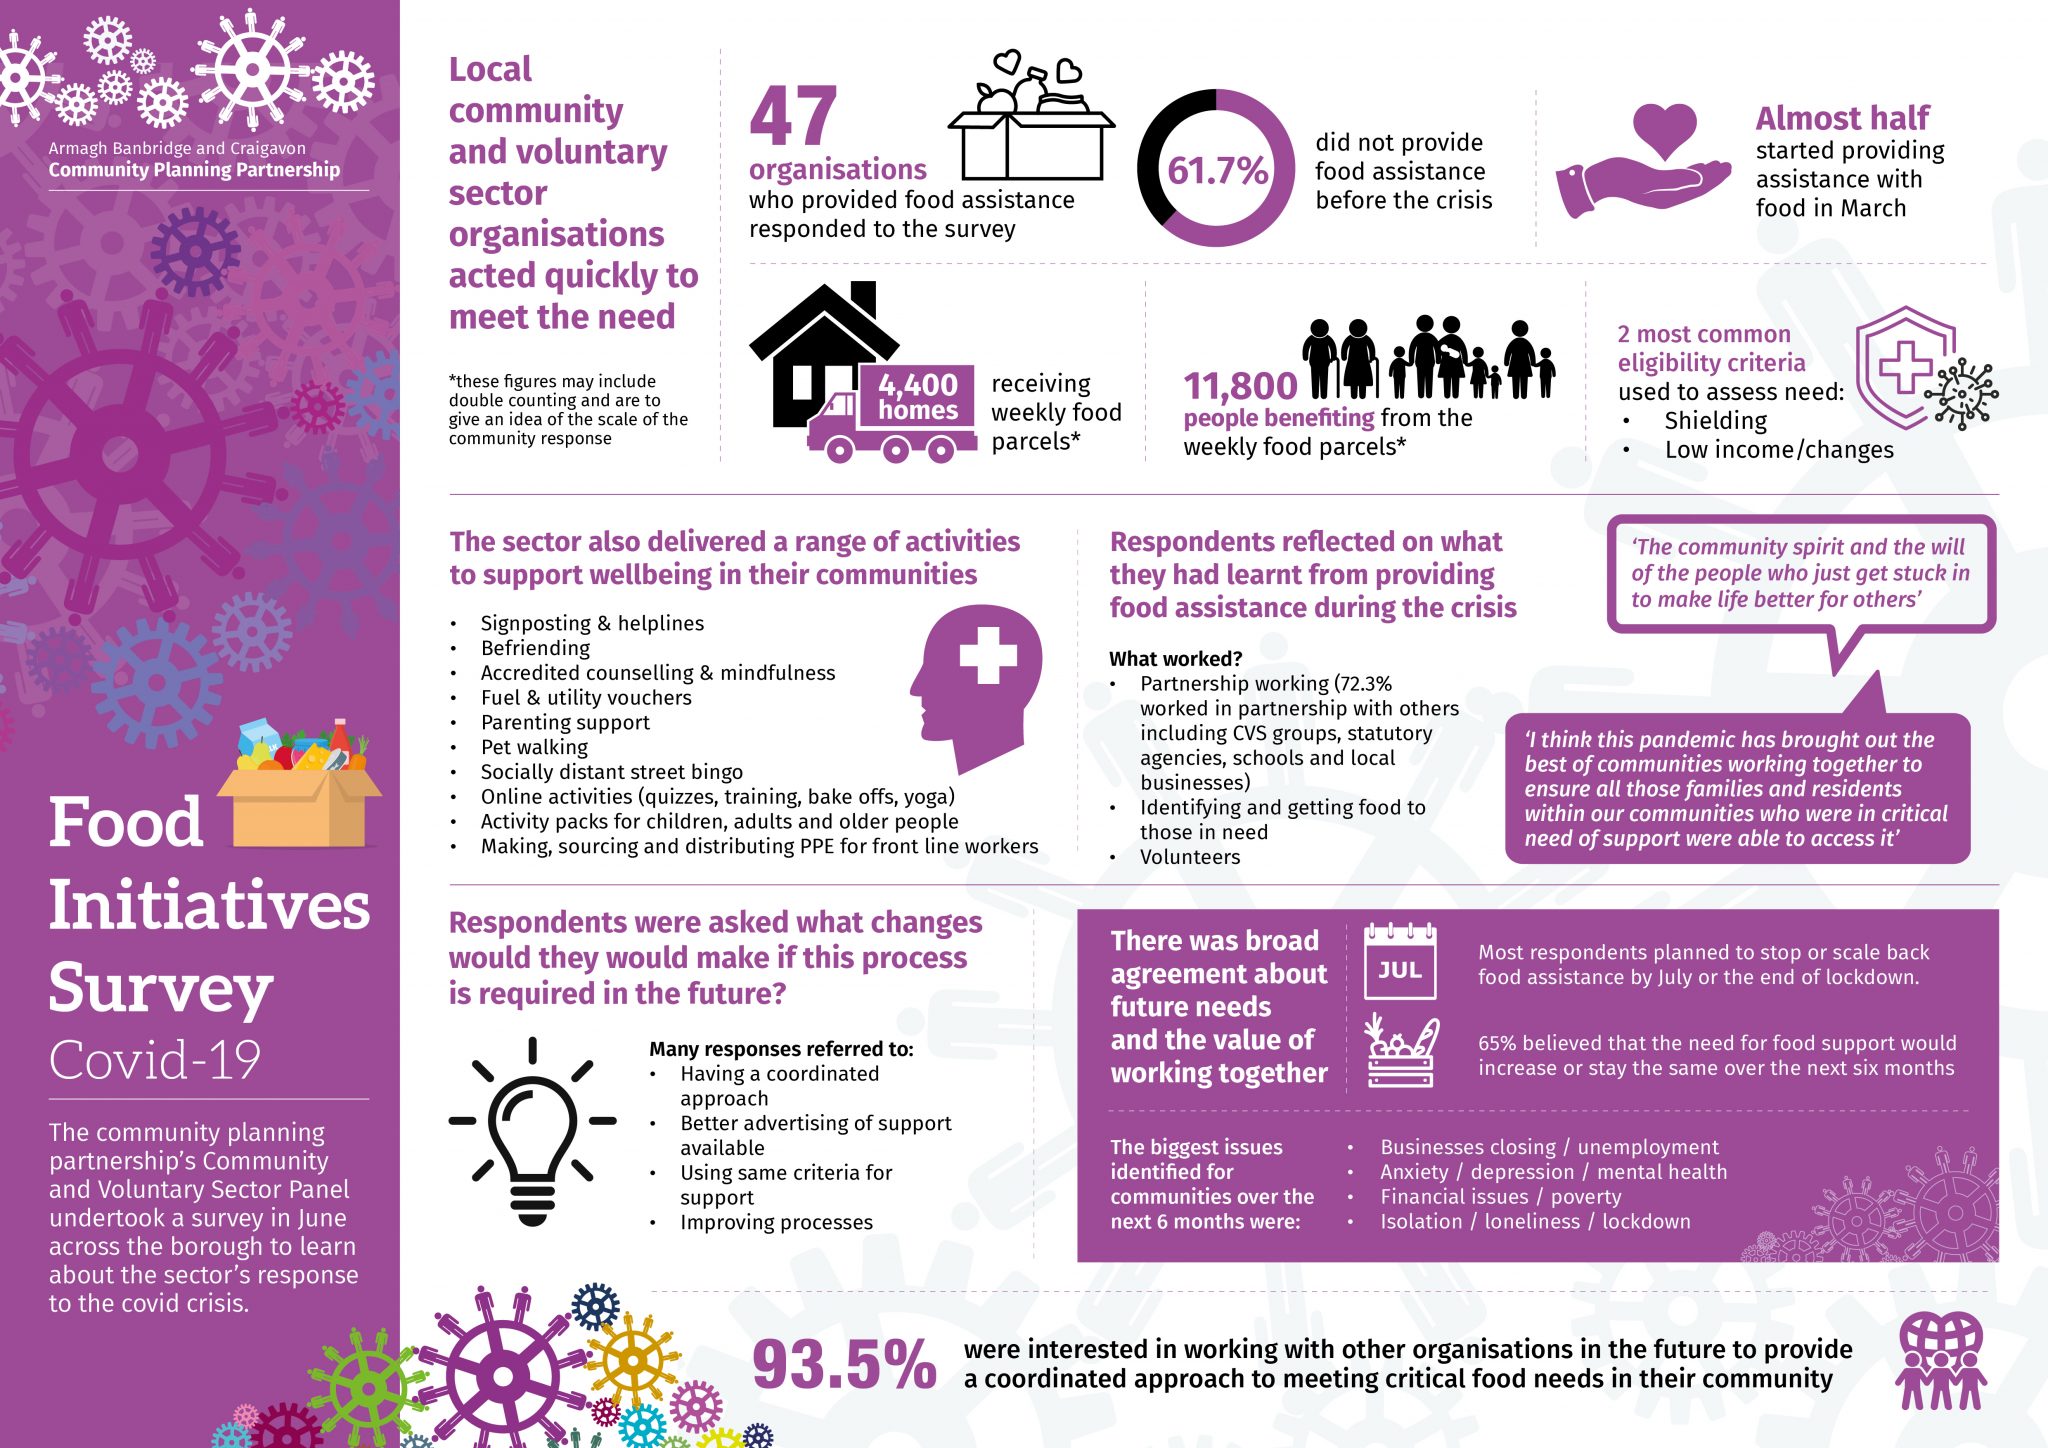 Summary of the key information from the Food Initiatives – Covid-19 Response Survey Report